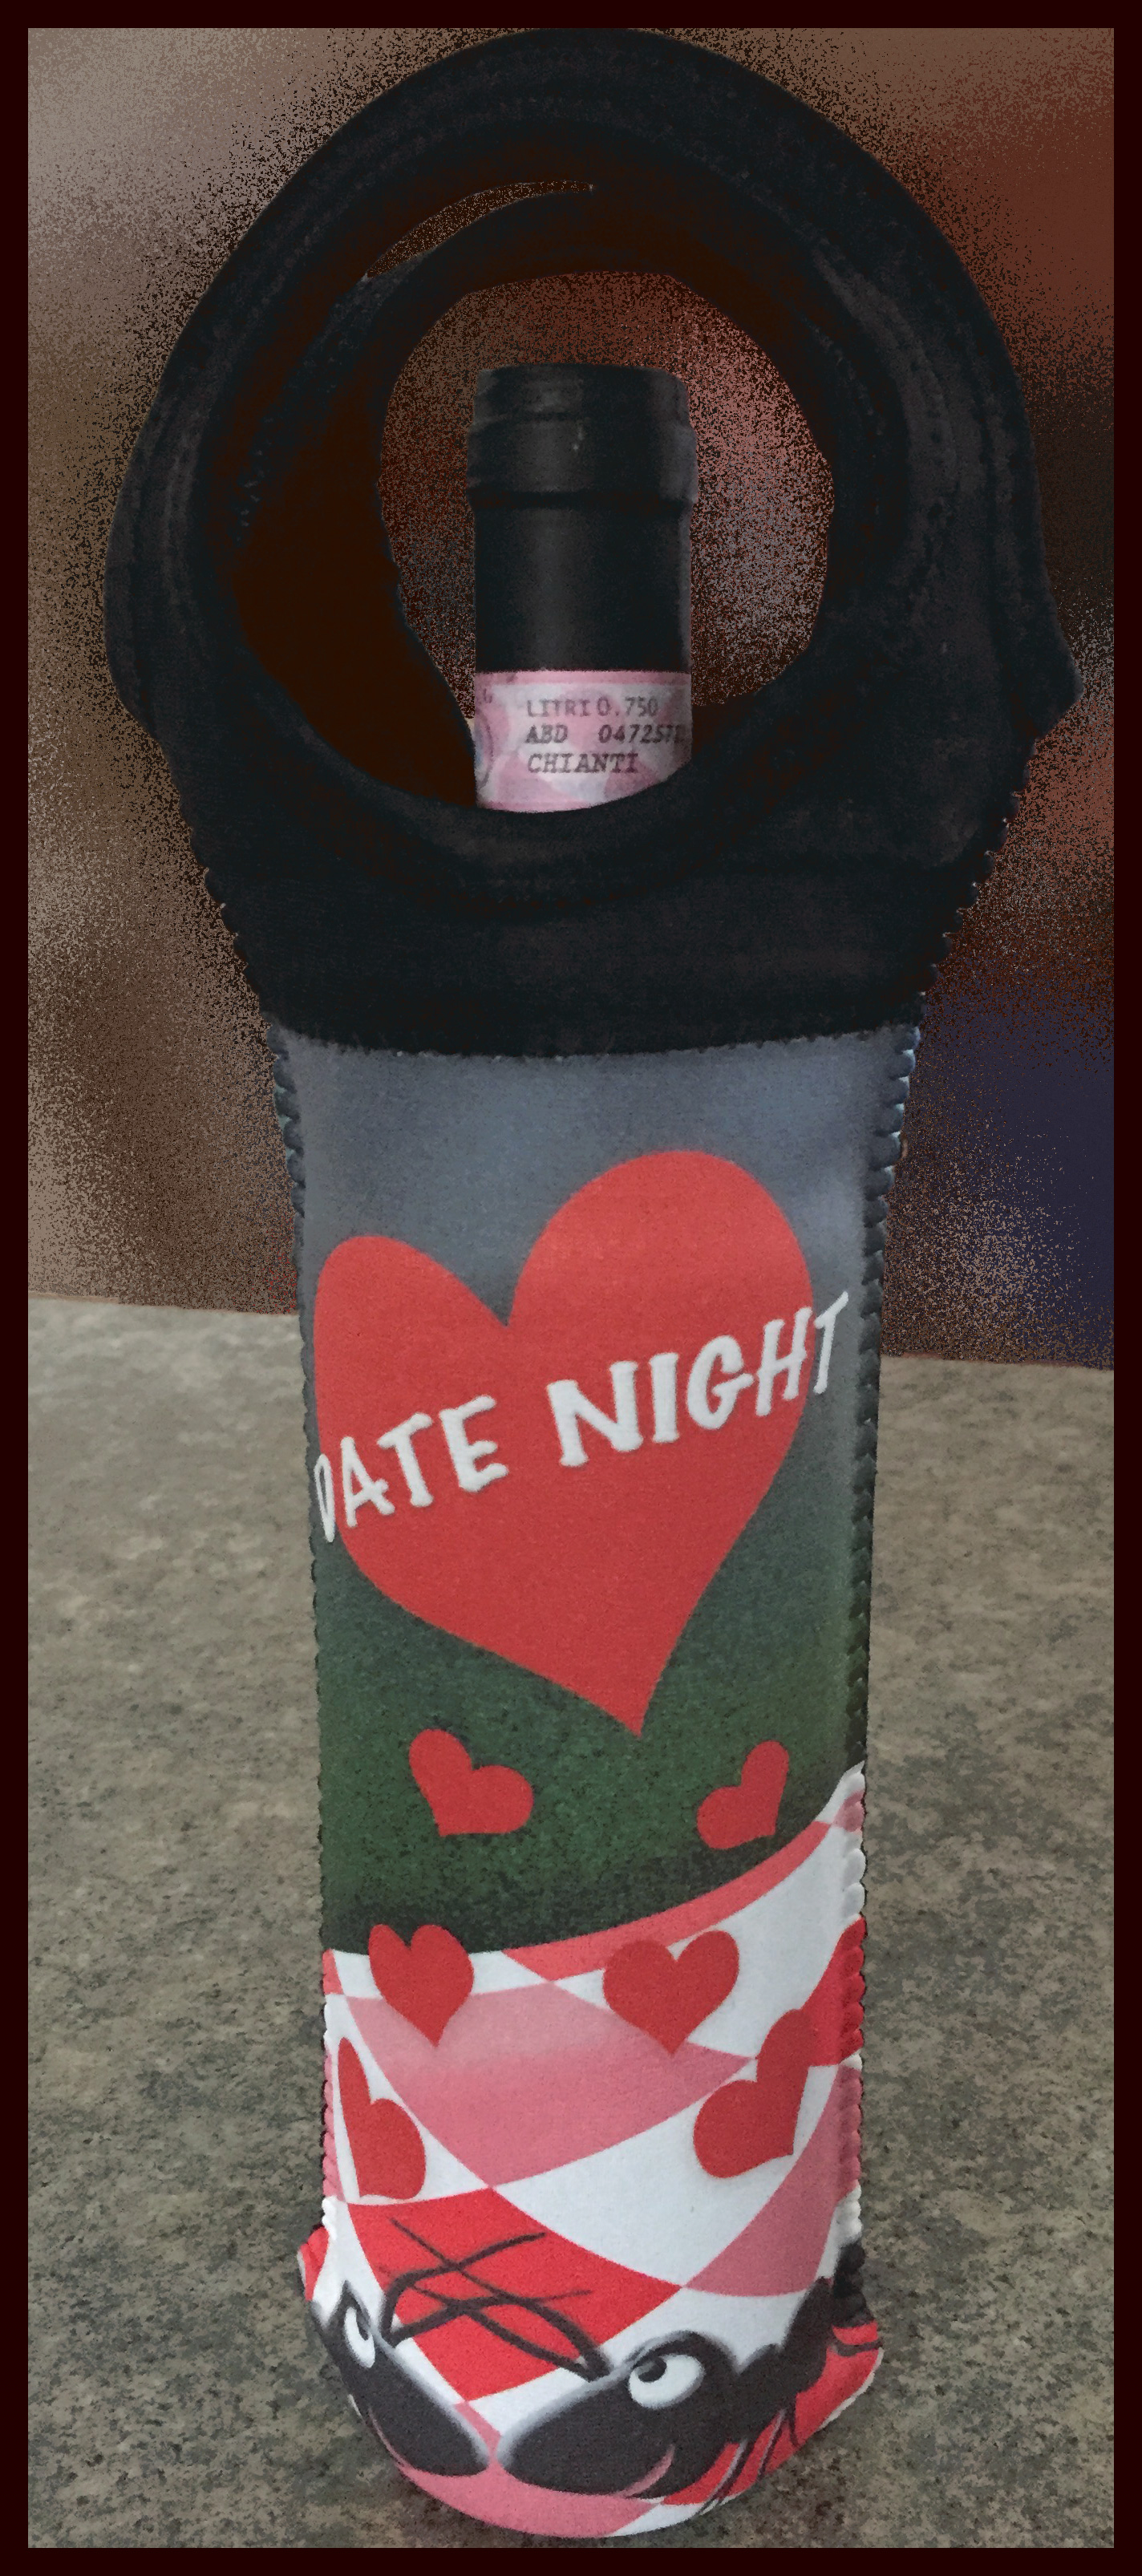 Date Night Wine Cozy made with sublimation printing